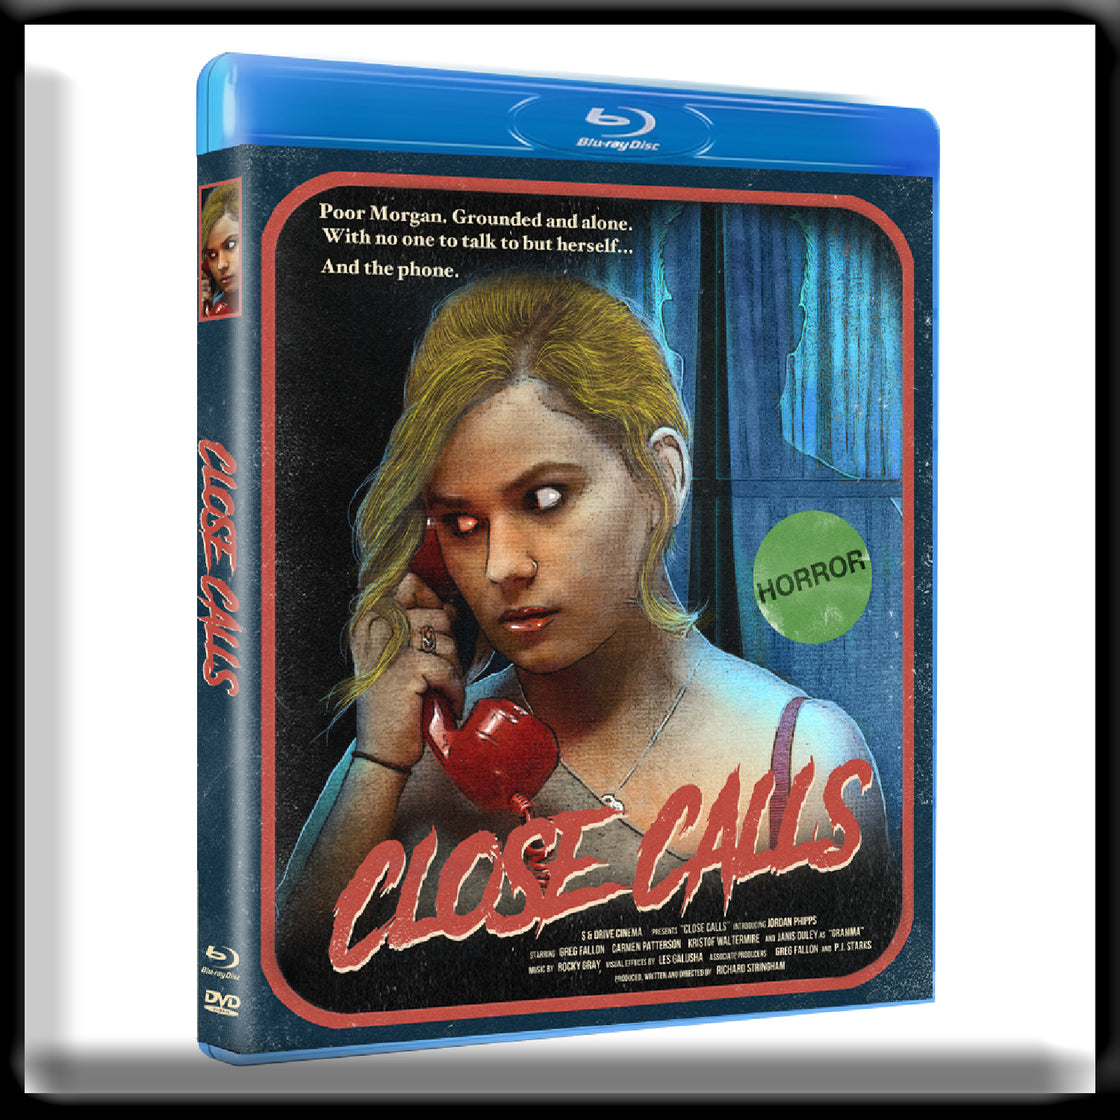 Close Calls - Special Collectors Edition (Dual Layer Blu-ray+DVD) SIGNED + Slip Cover